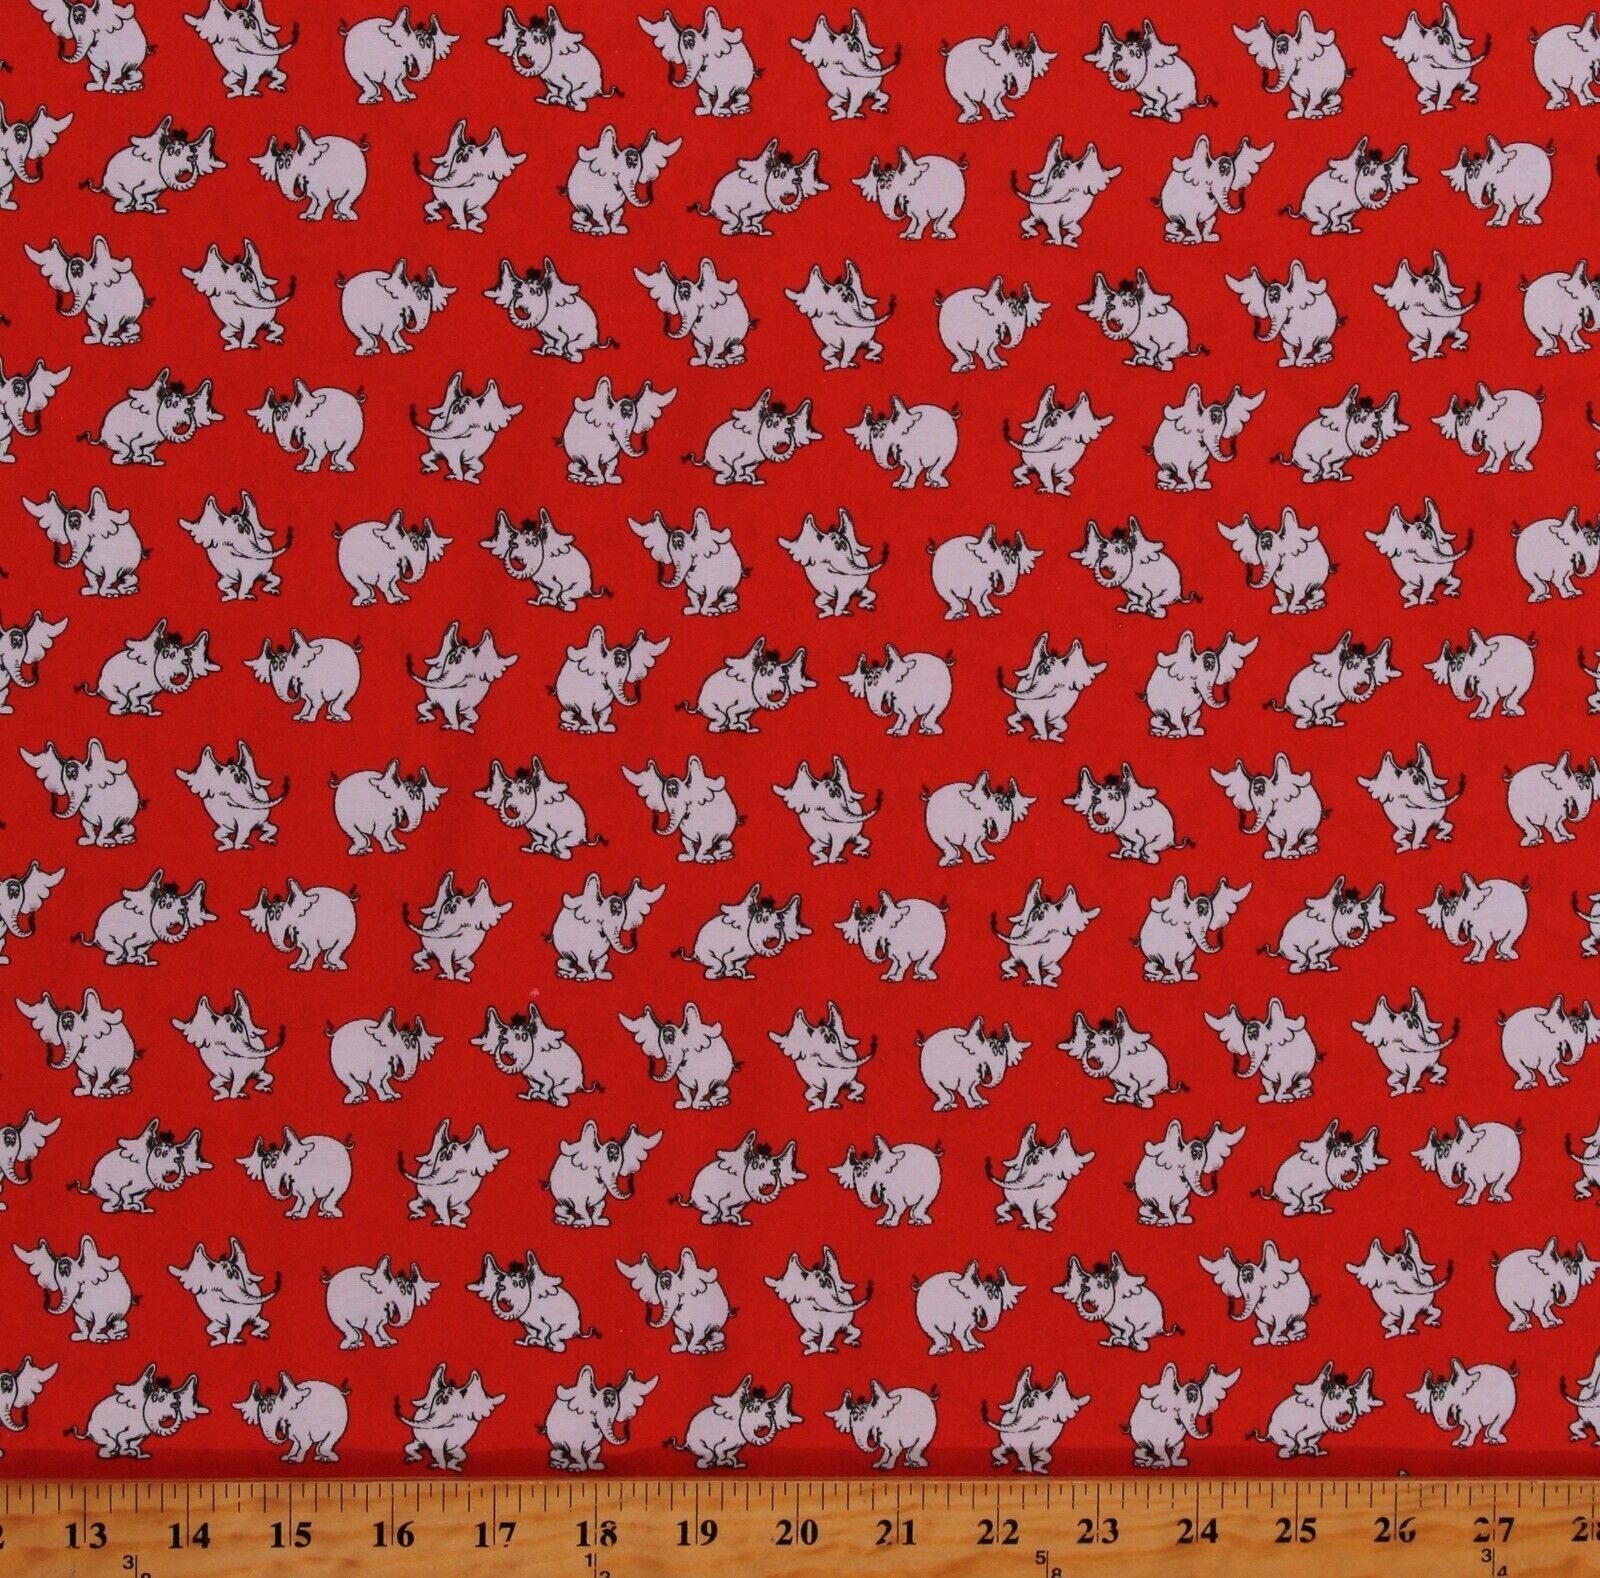 Primary image for Cotton Horton Hears A Who A Little Dr. Seuss Fabric Print by the Yard D579.86